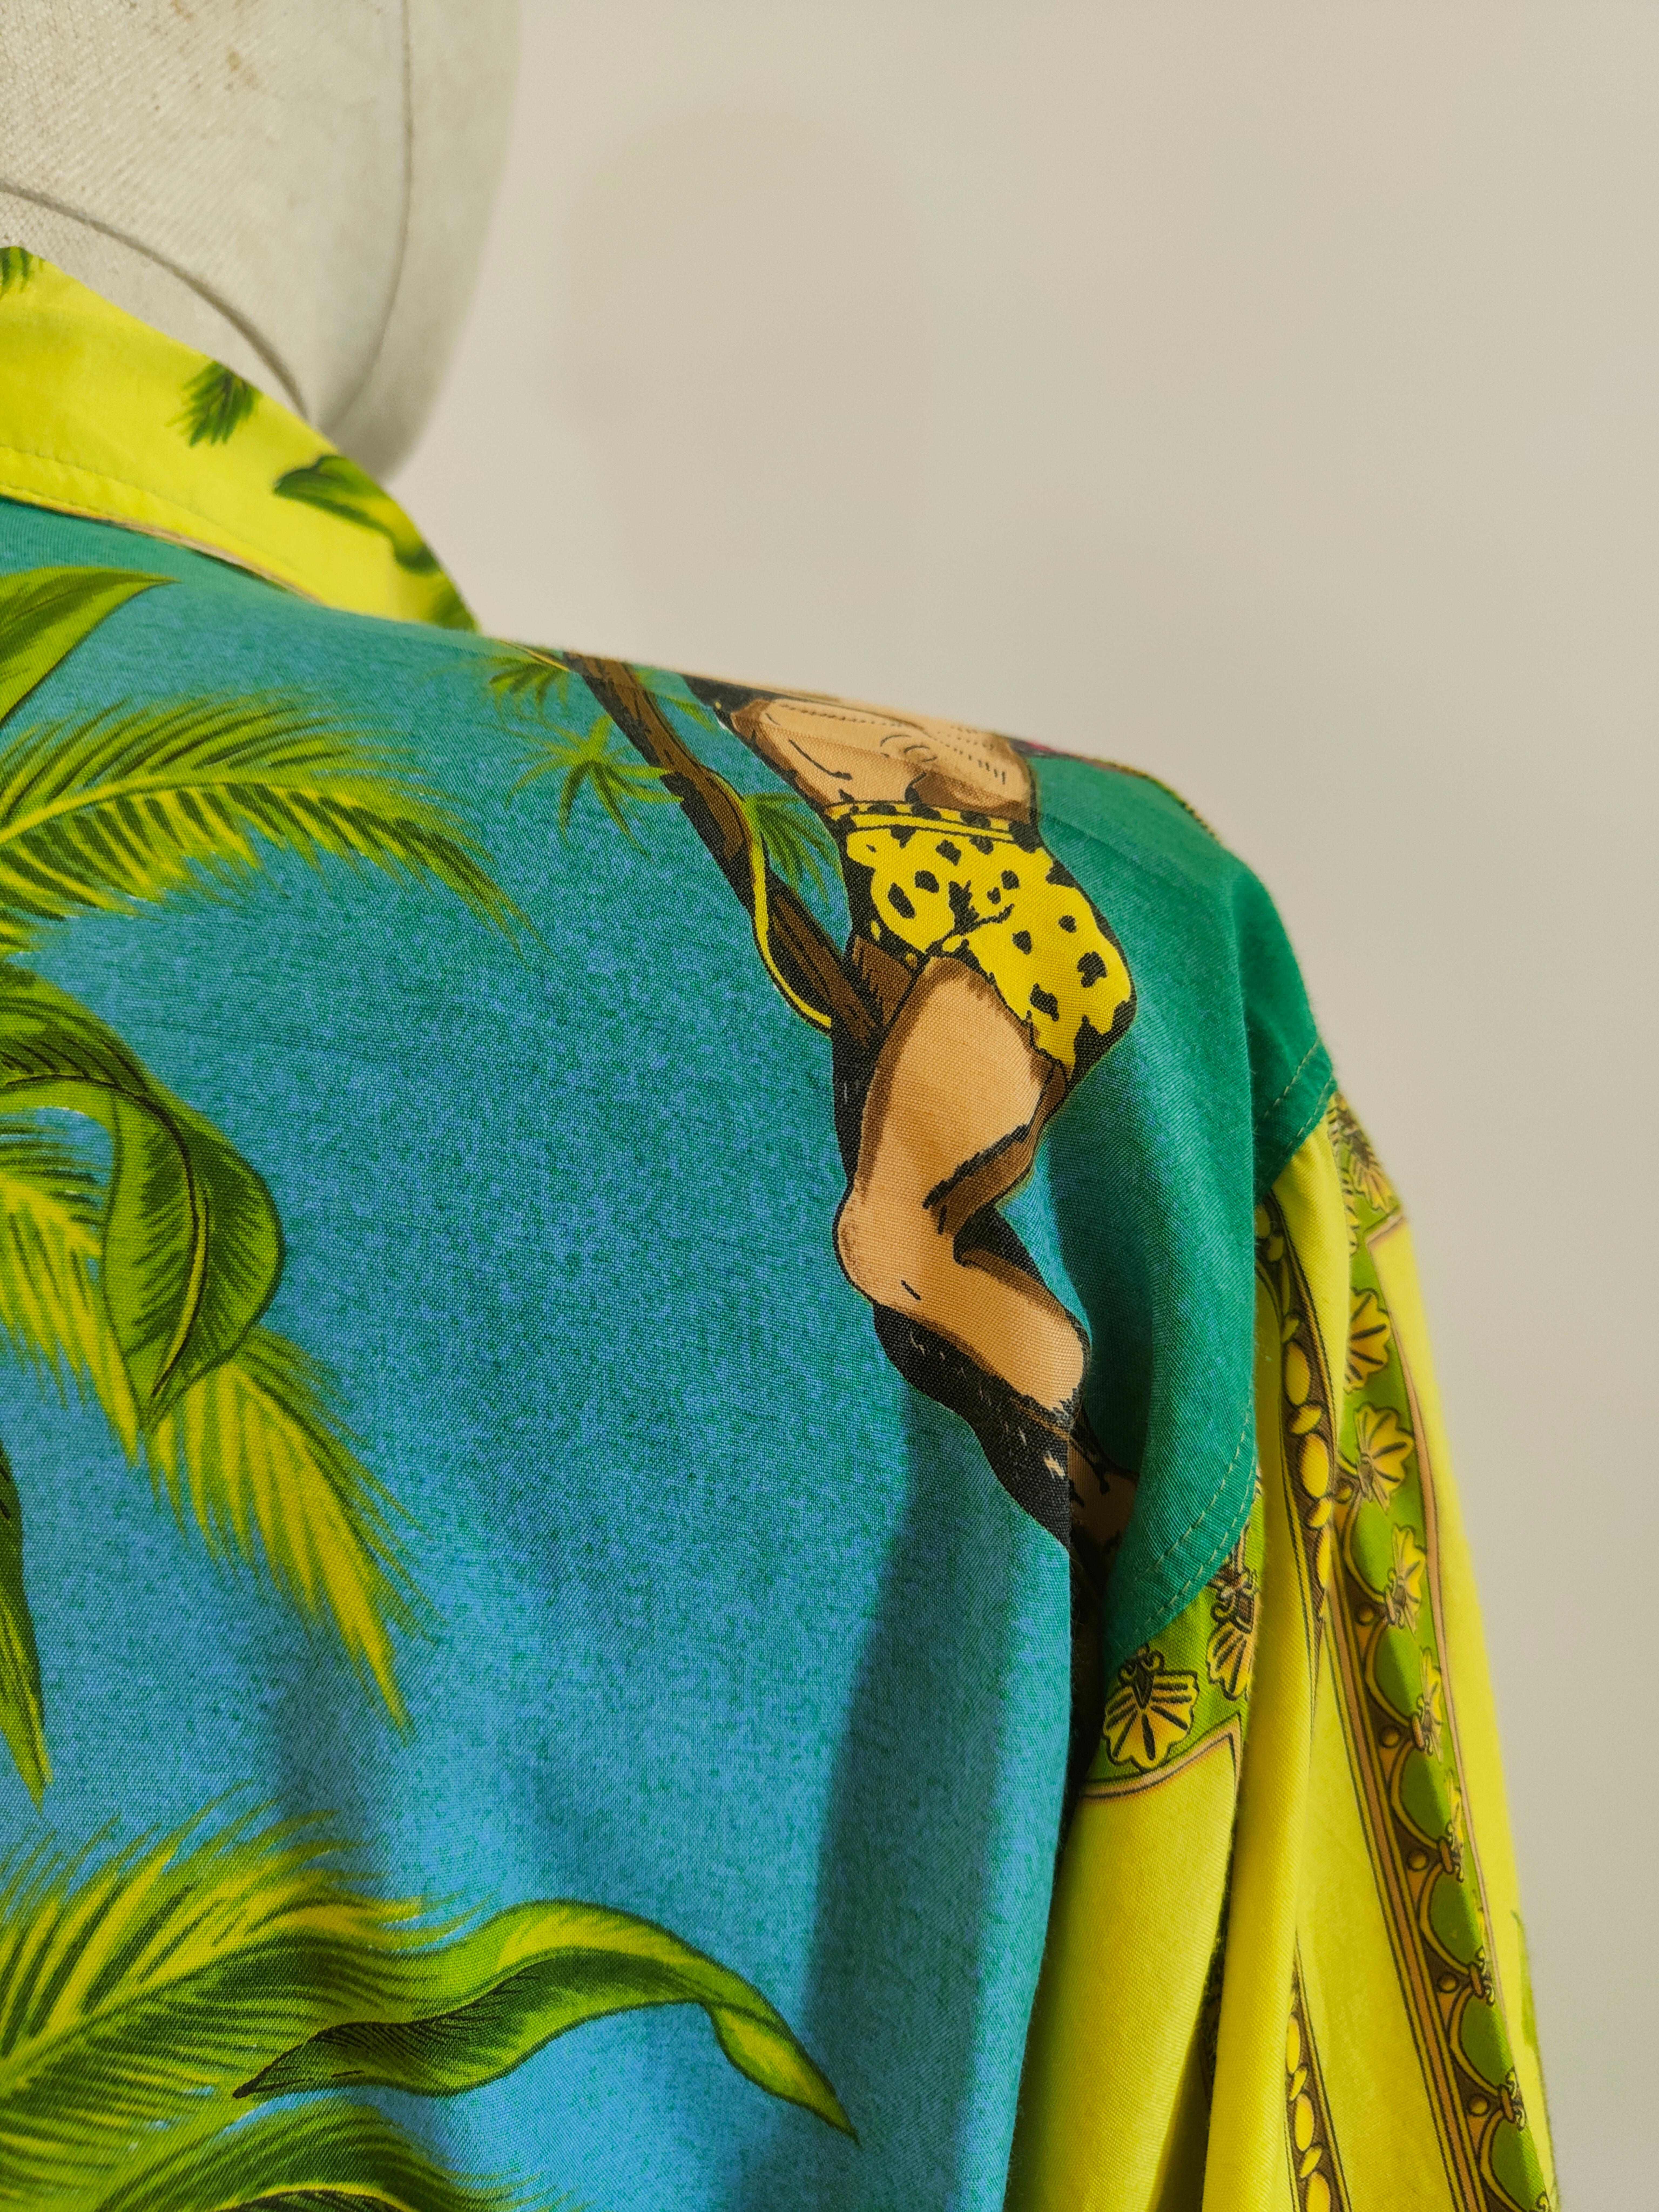 Versace iconic cotton Tarzan shirt In Excellent Condition For Sale In Capri, IT